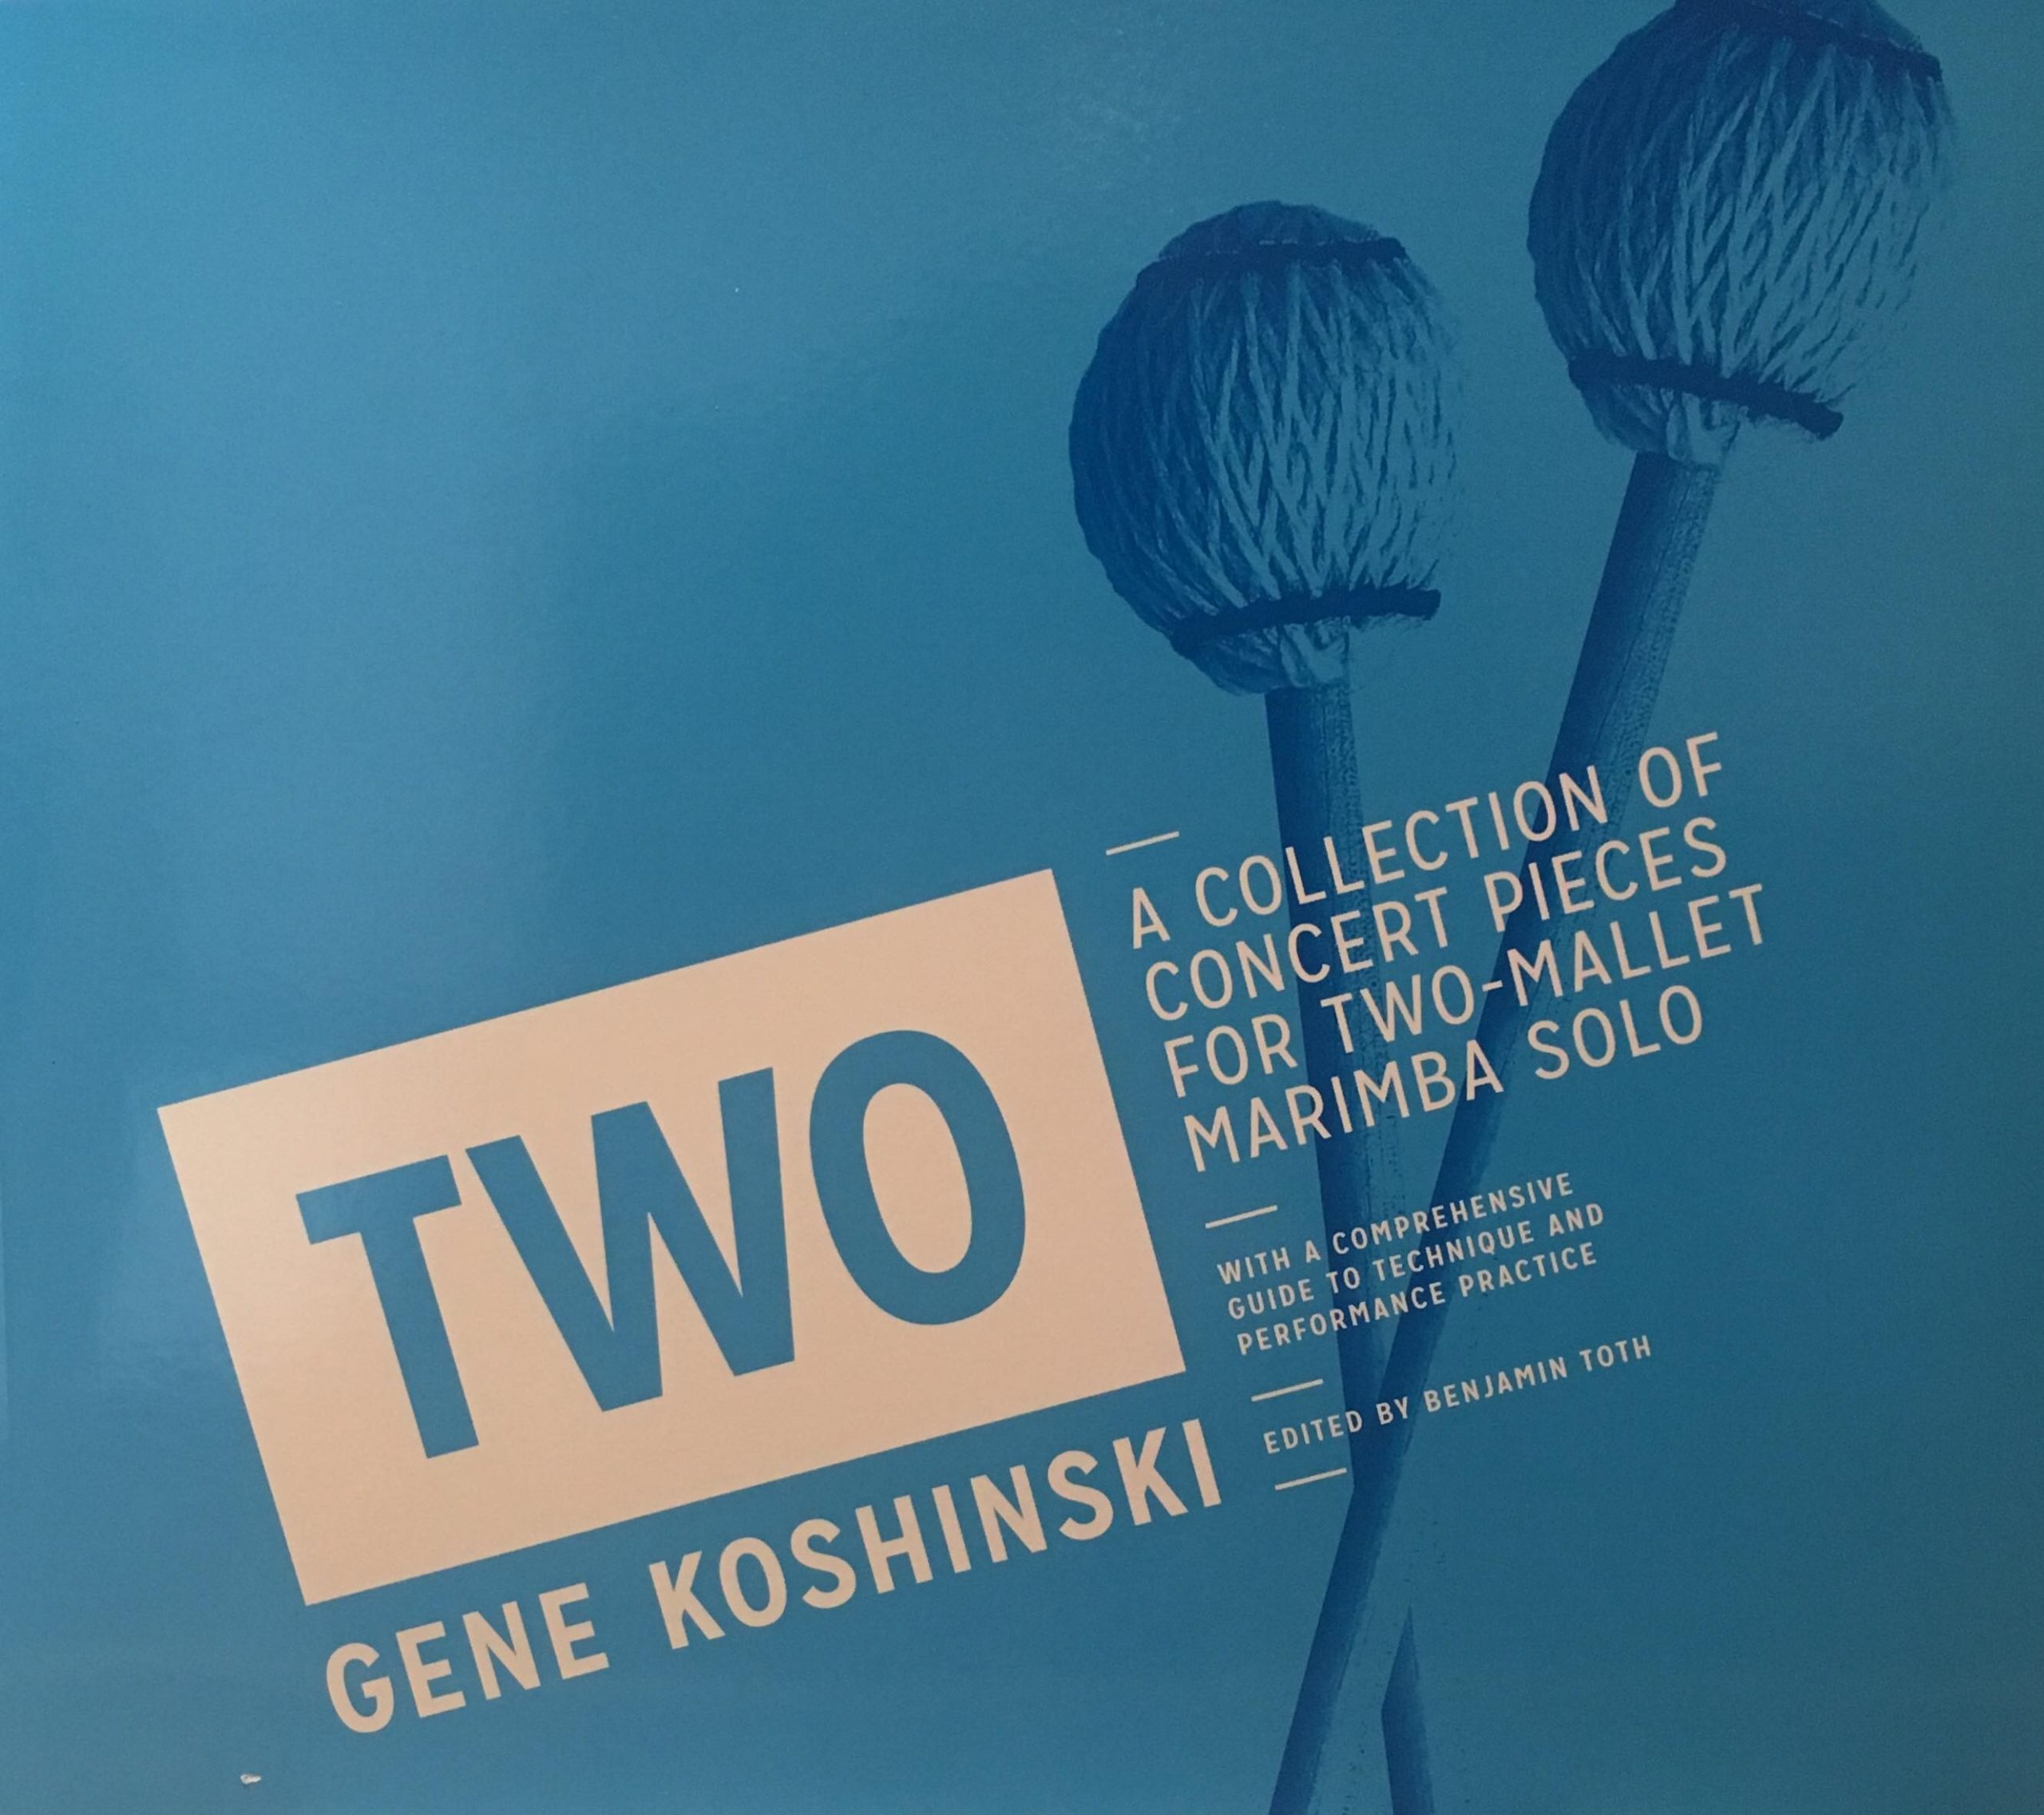 TWO - A Collection of Concert Pieces for two-mallet Marimba Solo by Gene Koshinski